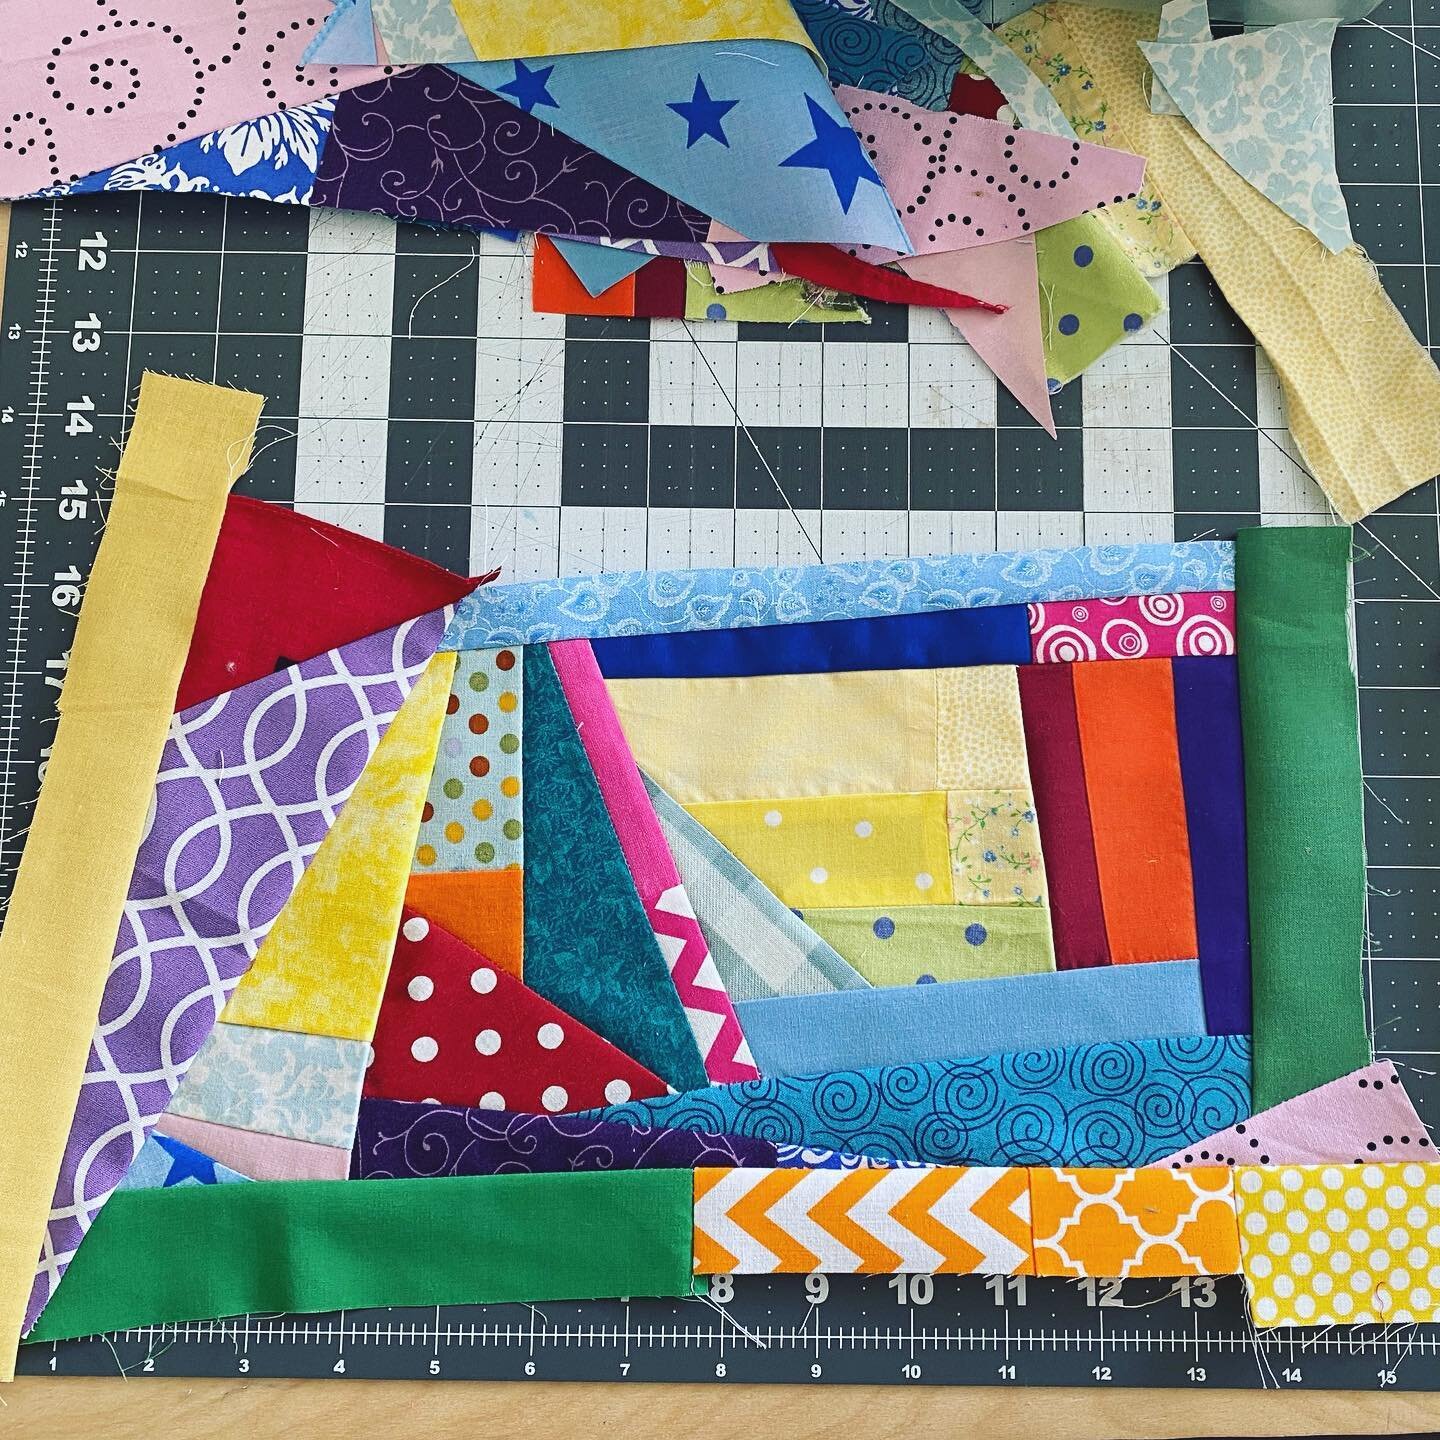 heavily in my rainbow phase. also my &ldquo;just put shit together &amp; see how it turns out&rdquo; phase &amp; my &ldquo;oh hey gotta leave a border for edge beading, time to start over&rdquo; phase. 
&bull;&bull;&bull;
#scrapquilting #scrapbusting